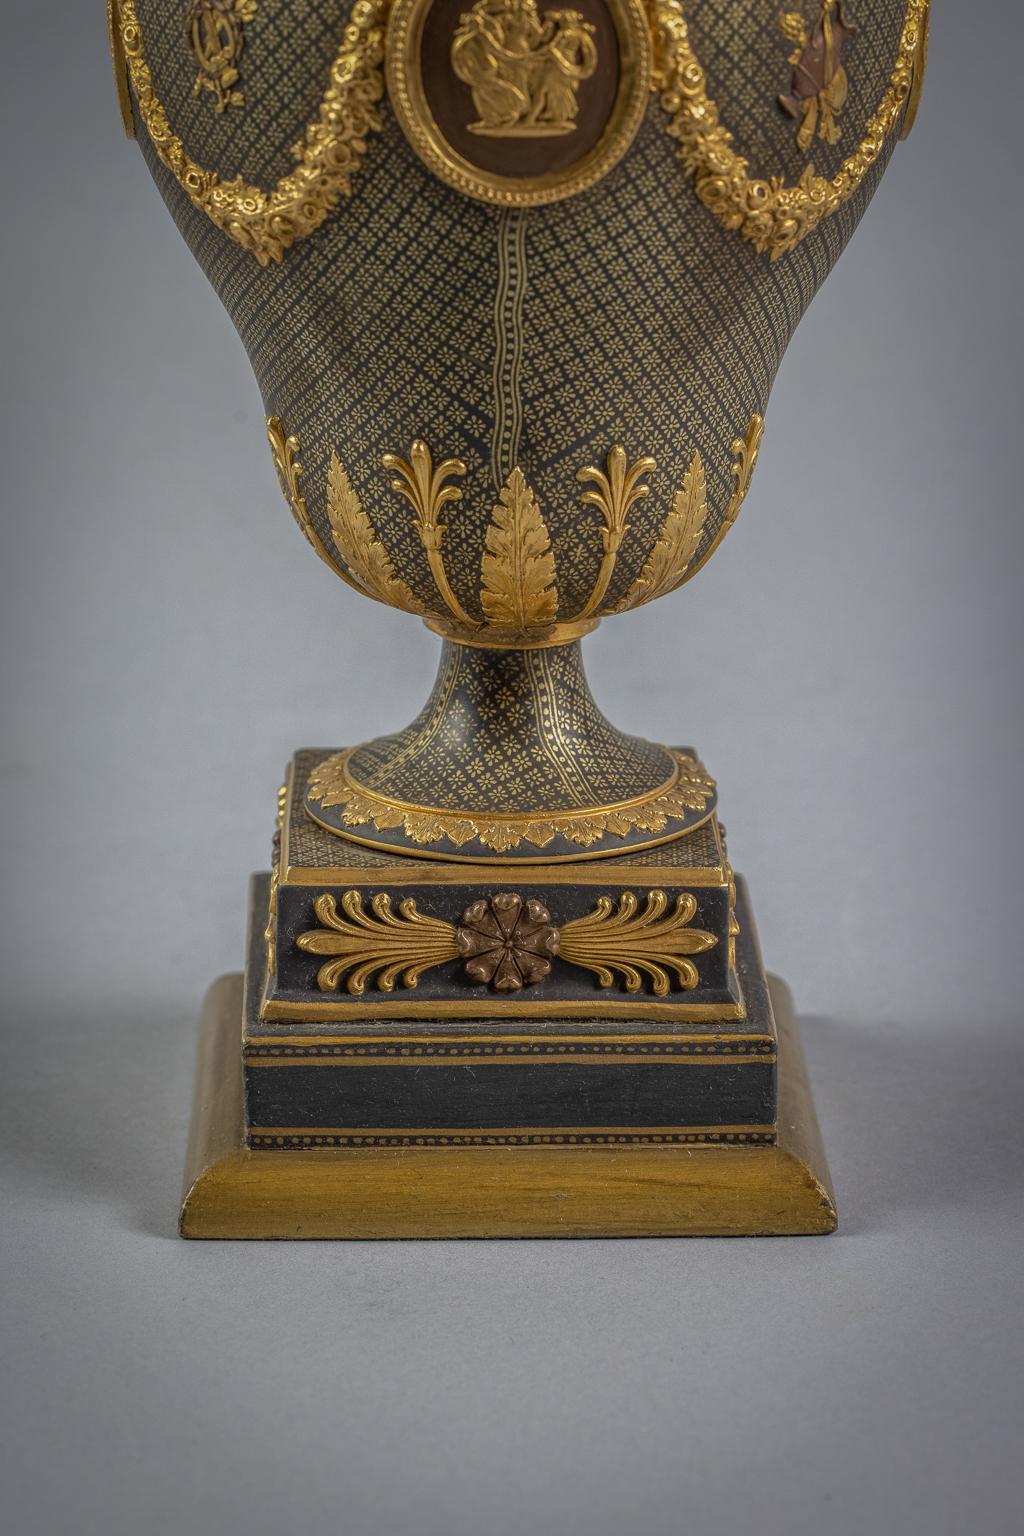 Wedgwood Black Porcelain and Gilt Covered Urn Mounted as Lamp, 19th Century For Sale 2